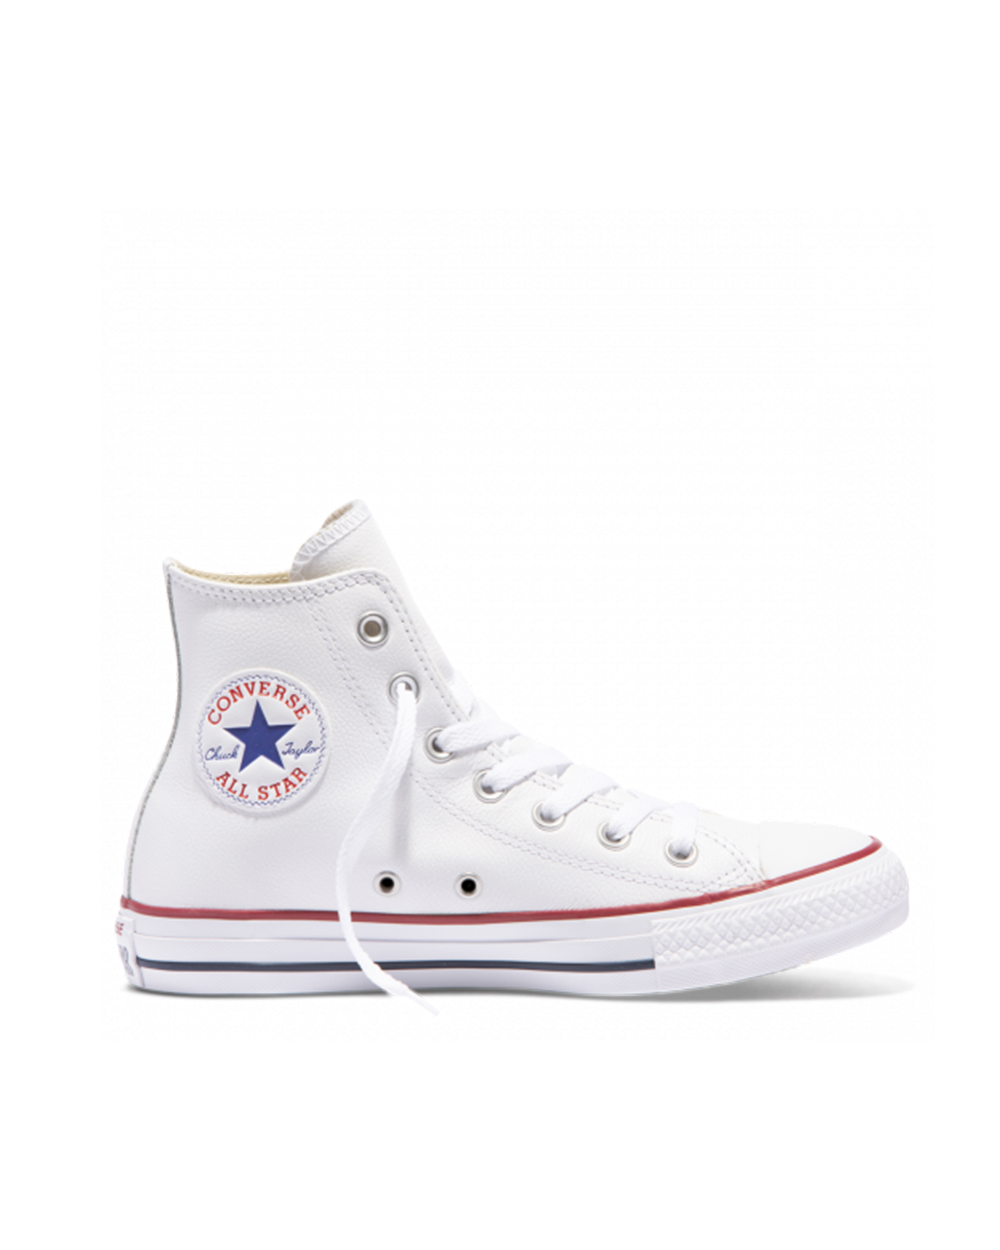 Chuck Taylor All Star Leather High Top White, $130 from Converse